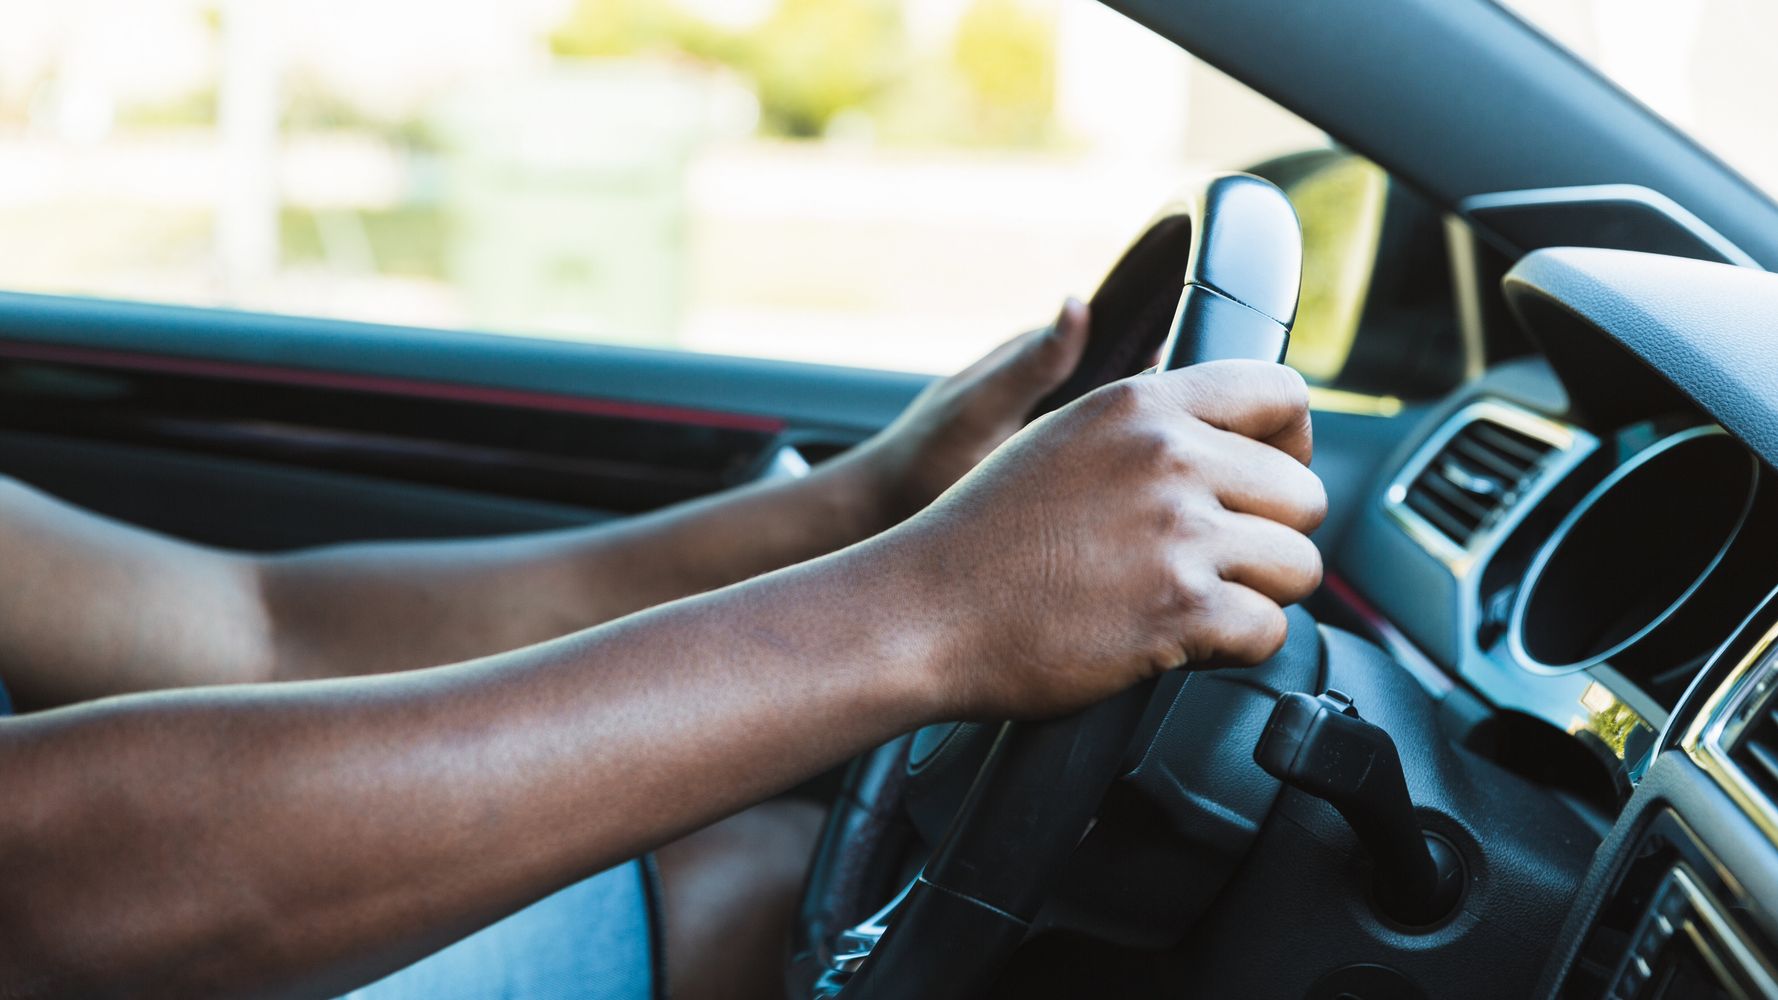 I’m A White Mom Teaching My Black Son To Drive. I’m Terrified For His Safety.